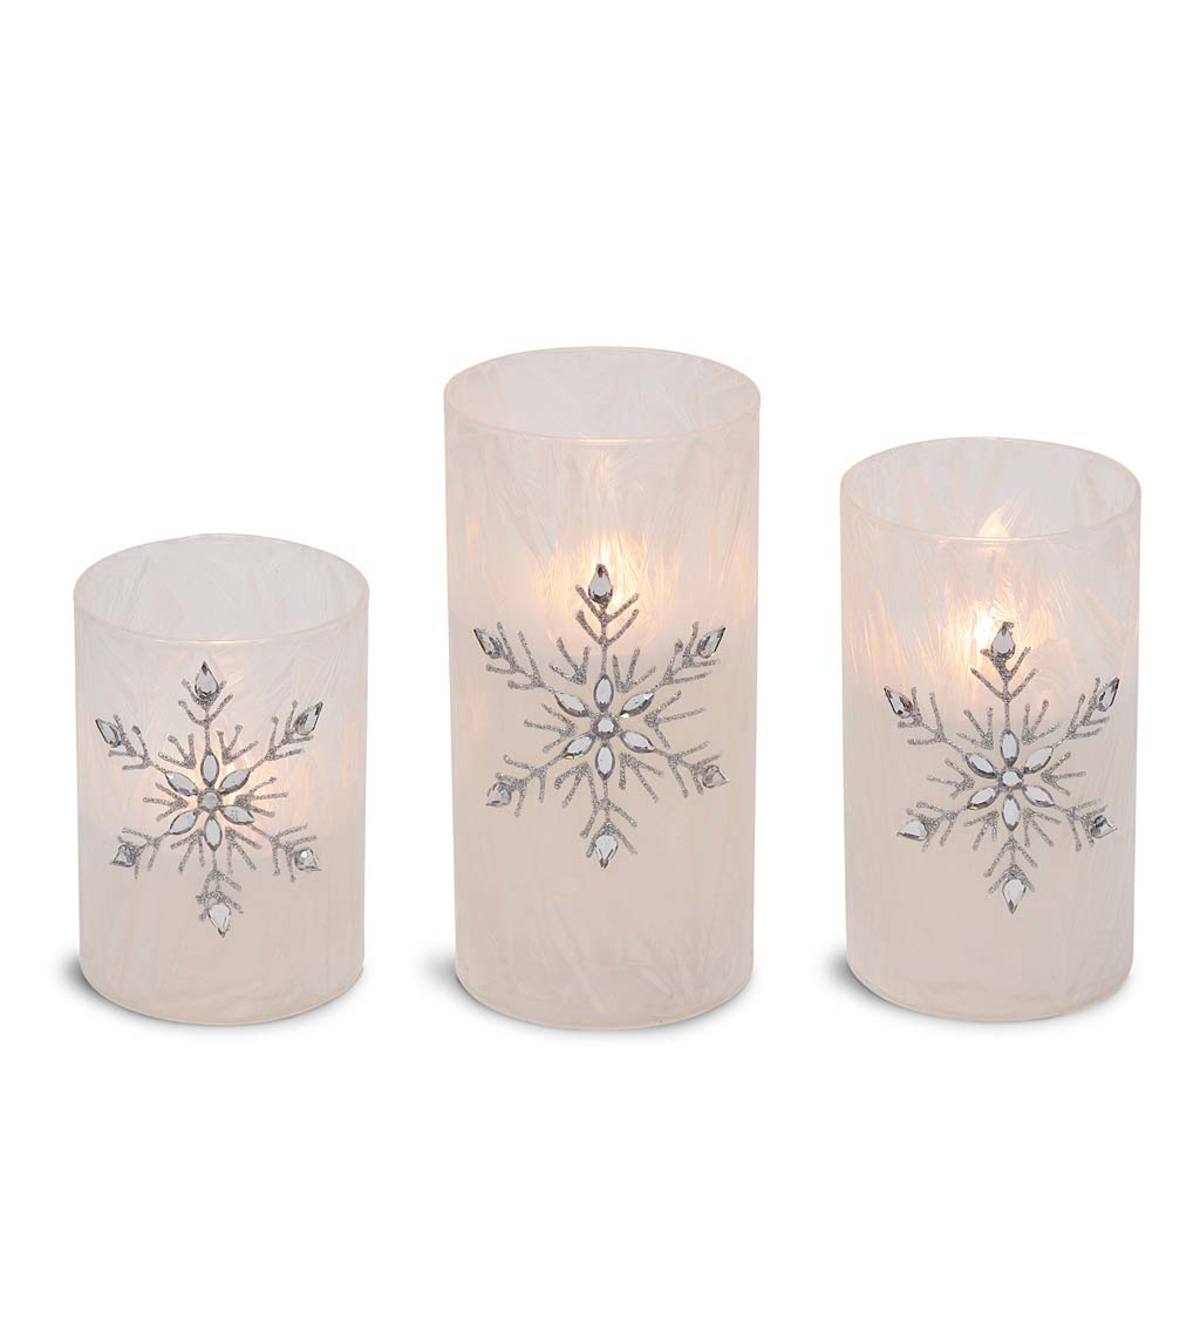 Flameless LED Glass Snowflake Candles, Set of 3